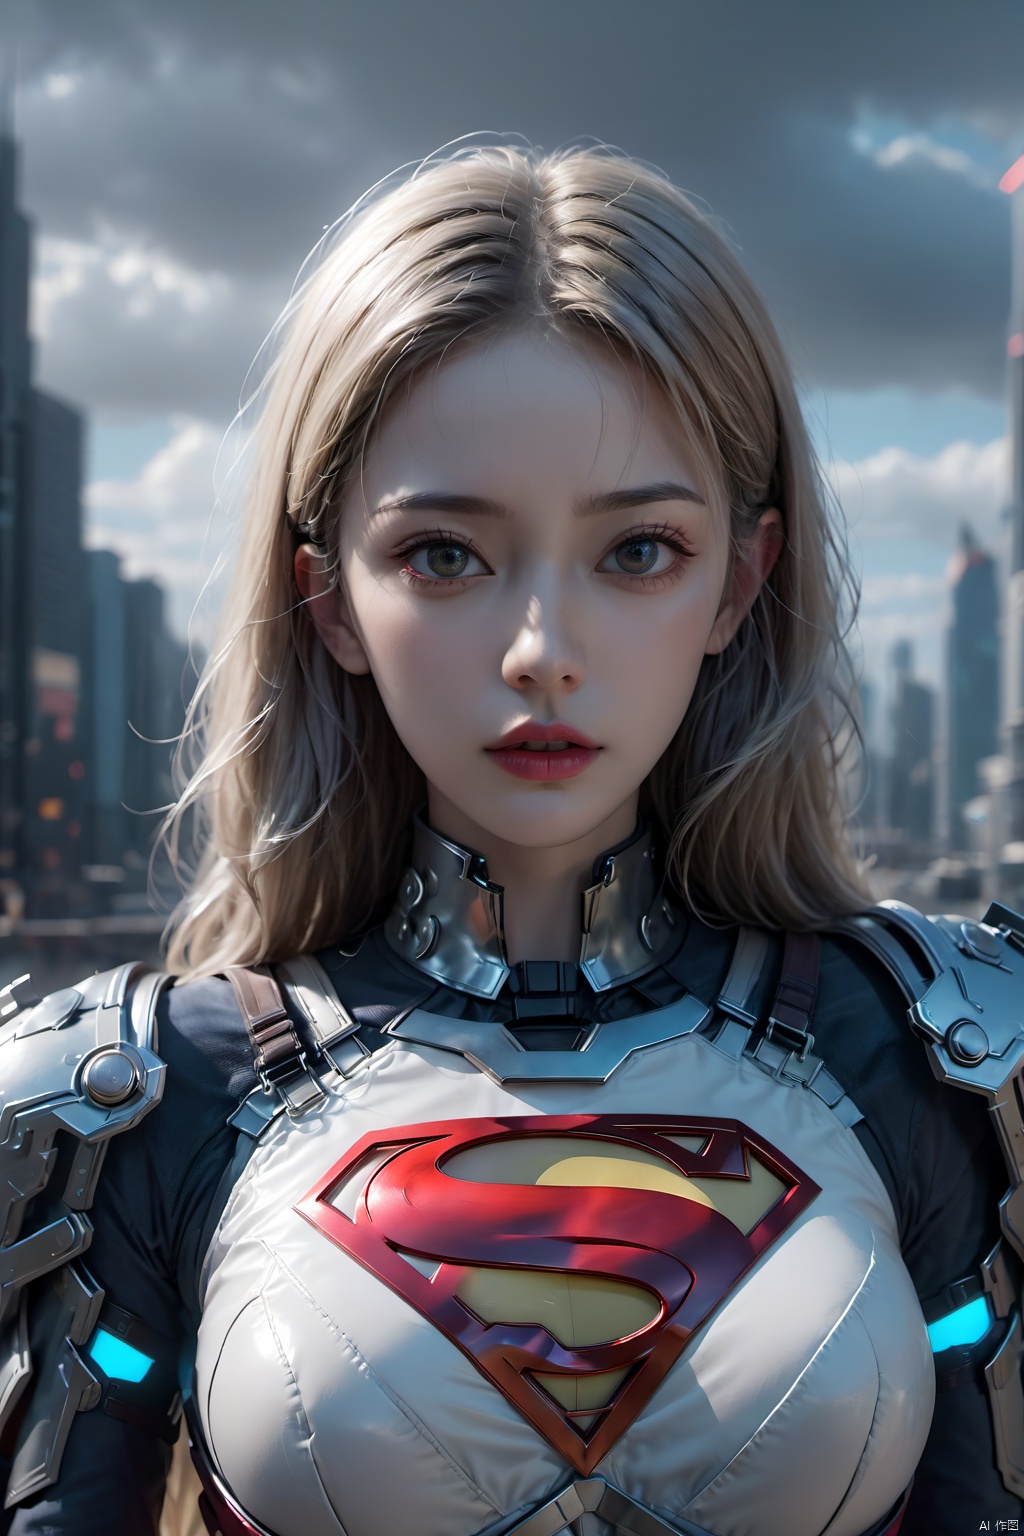  Supergirl, realistic, horror art, Vivid Colors, 8K, Ray Tracing Ambient Occlusion, Futurism, superb, professional, cyberpunk chrome accent body armor, horror element, dark cloudy sky background, deep shadow
